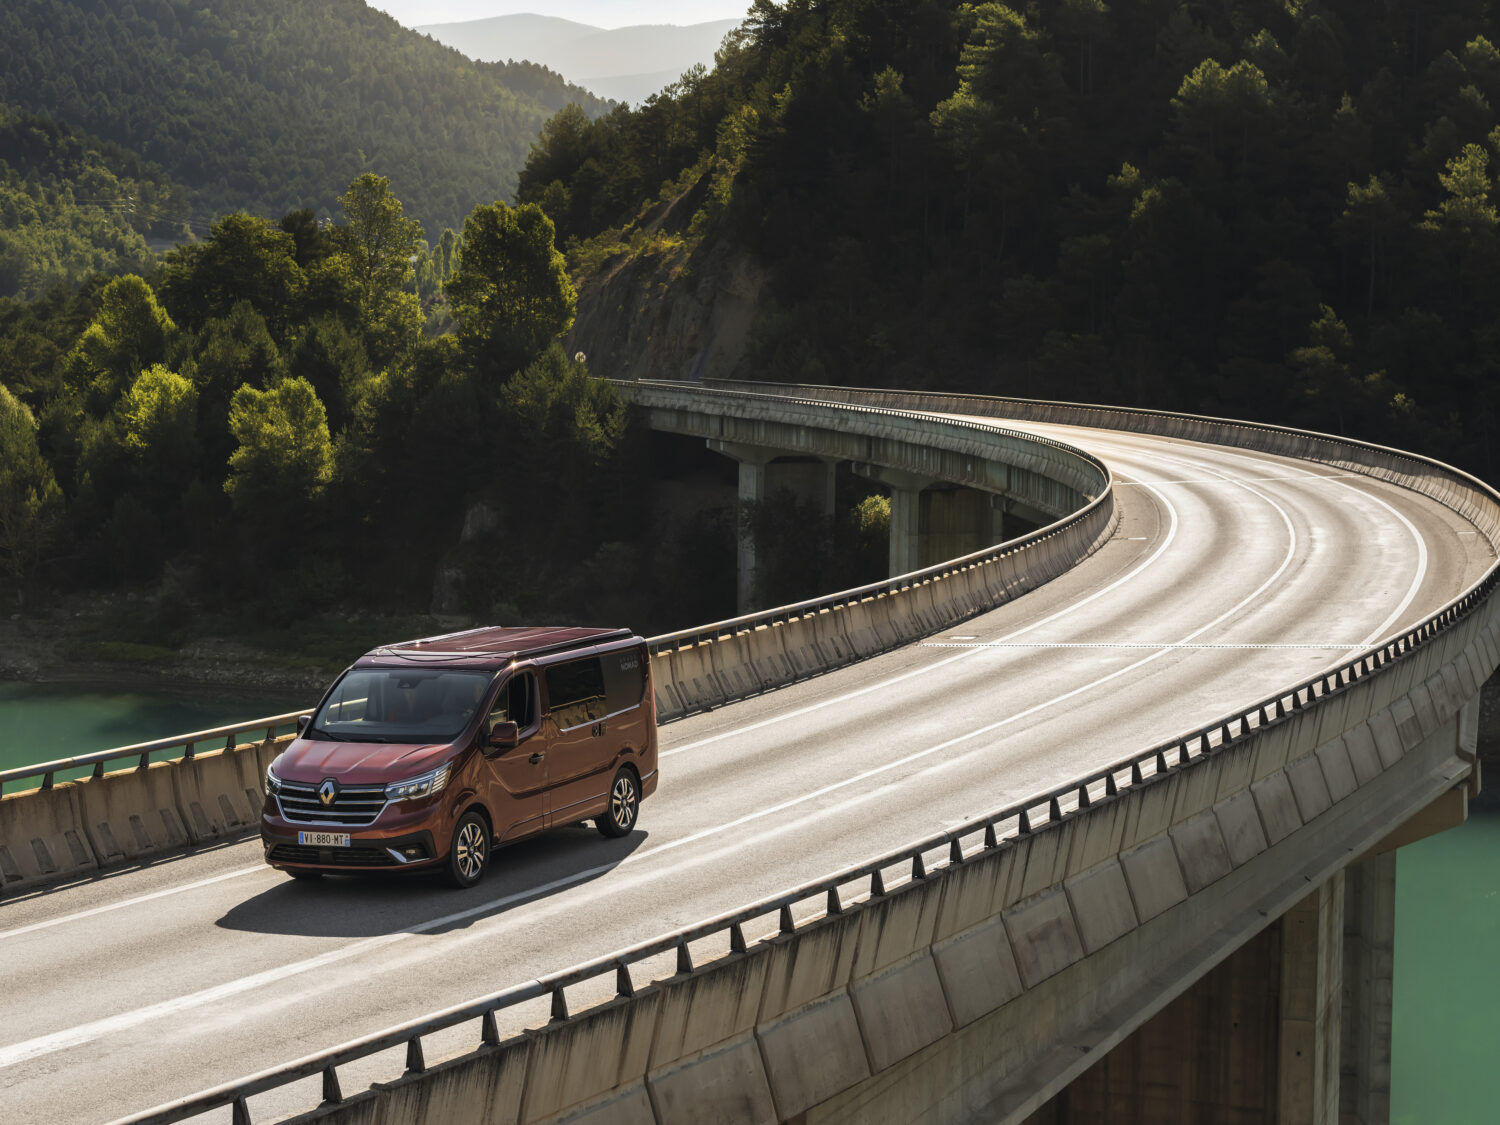 All-new Renault Trafic SpaceNomad